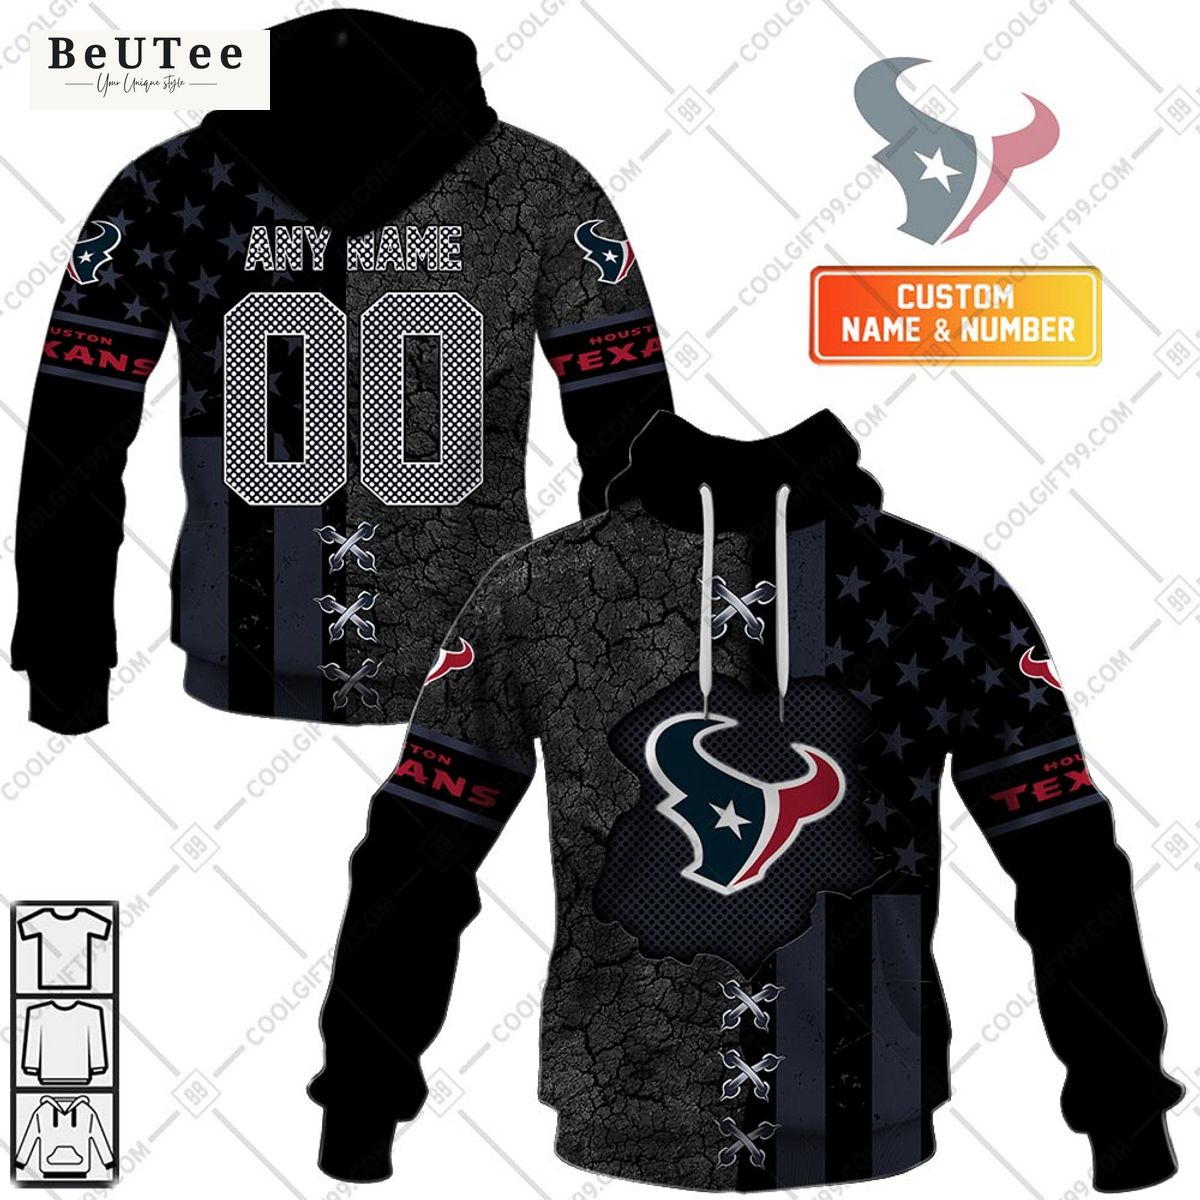 Customized Houston Texans NFL printed hoodie shirt I like your hairstyle